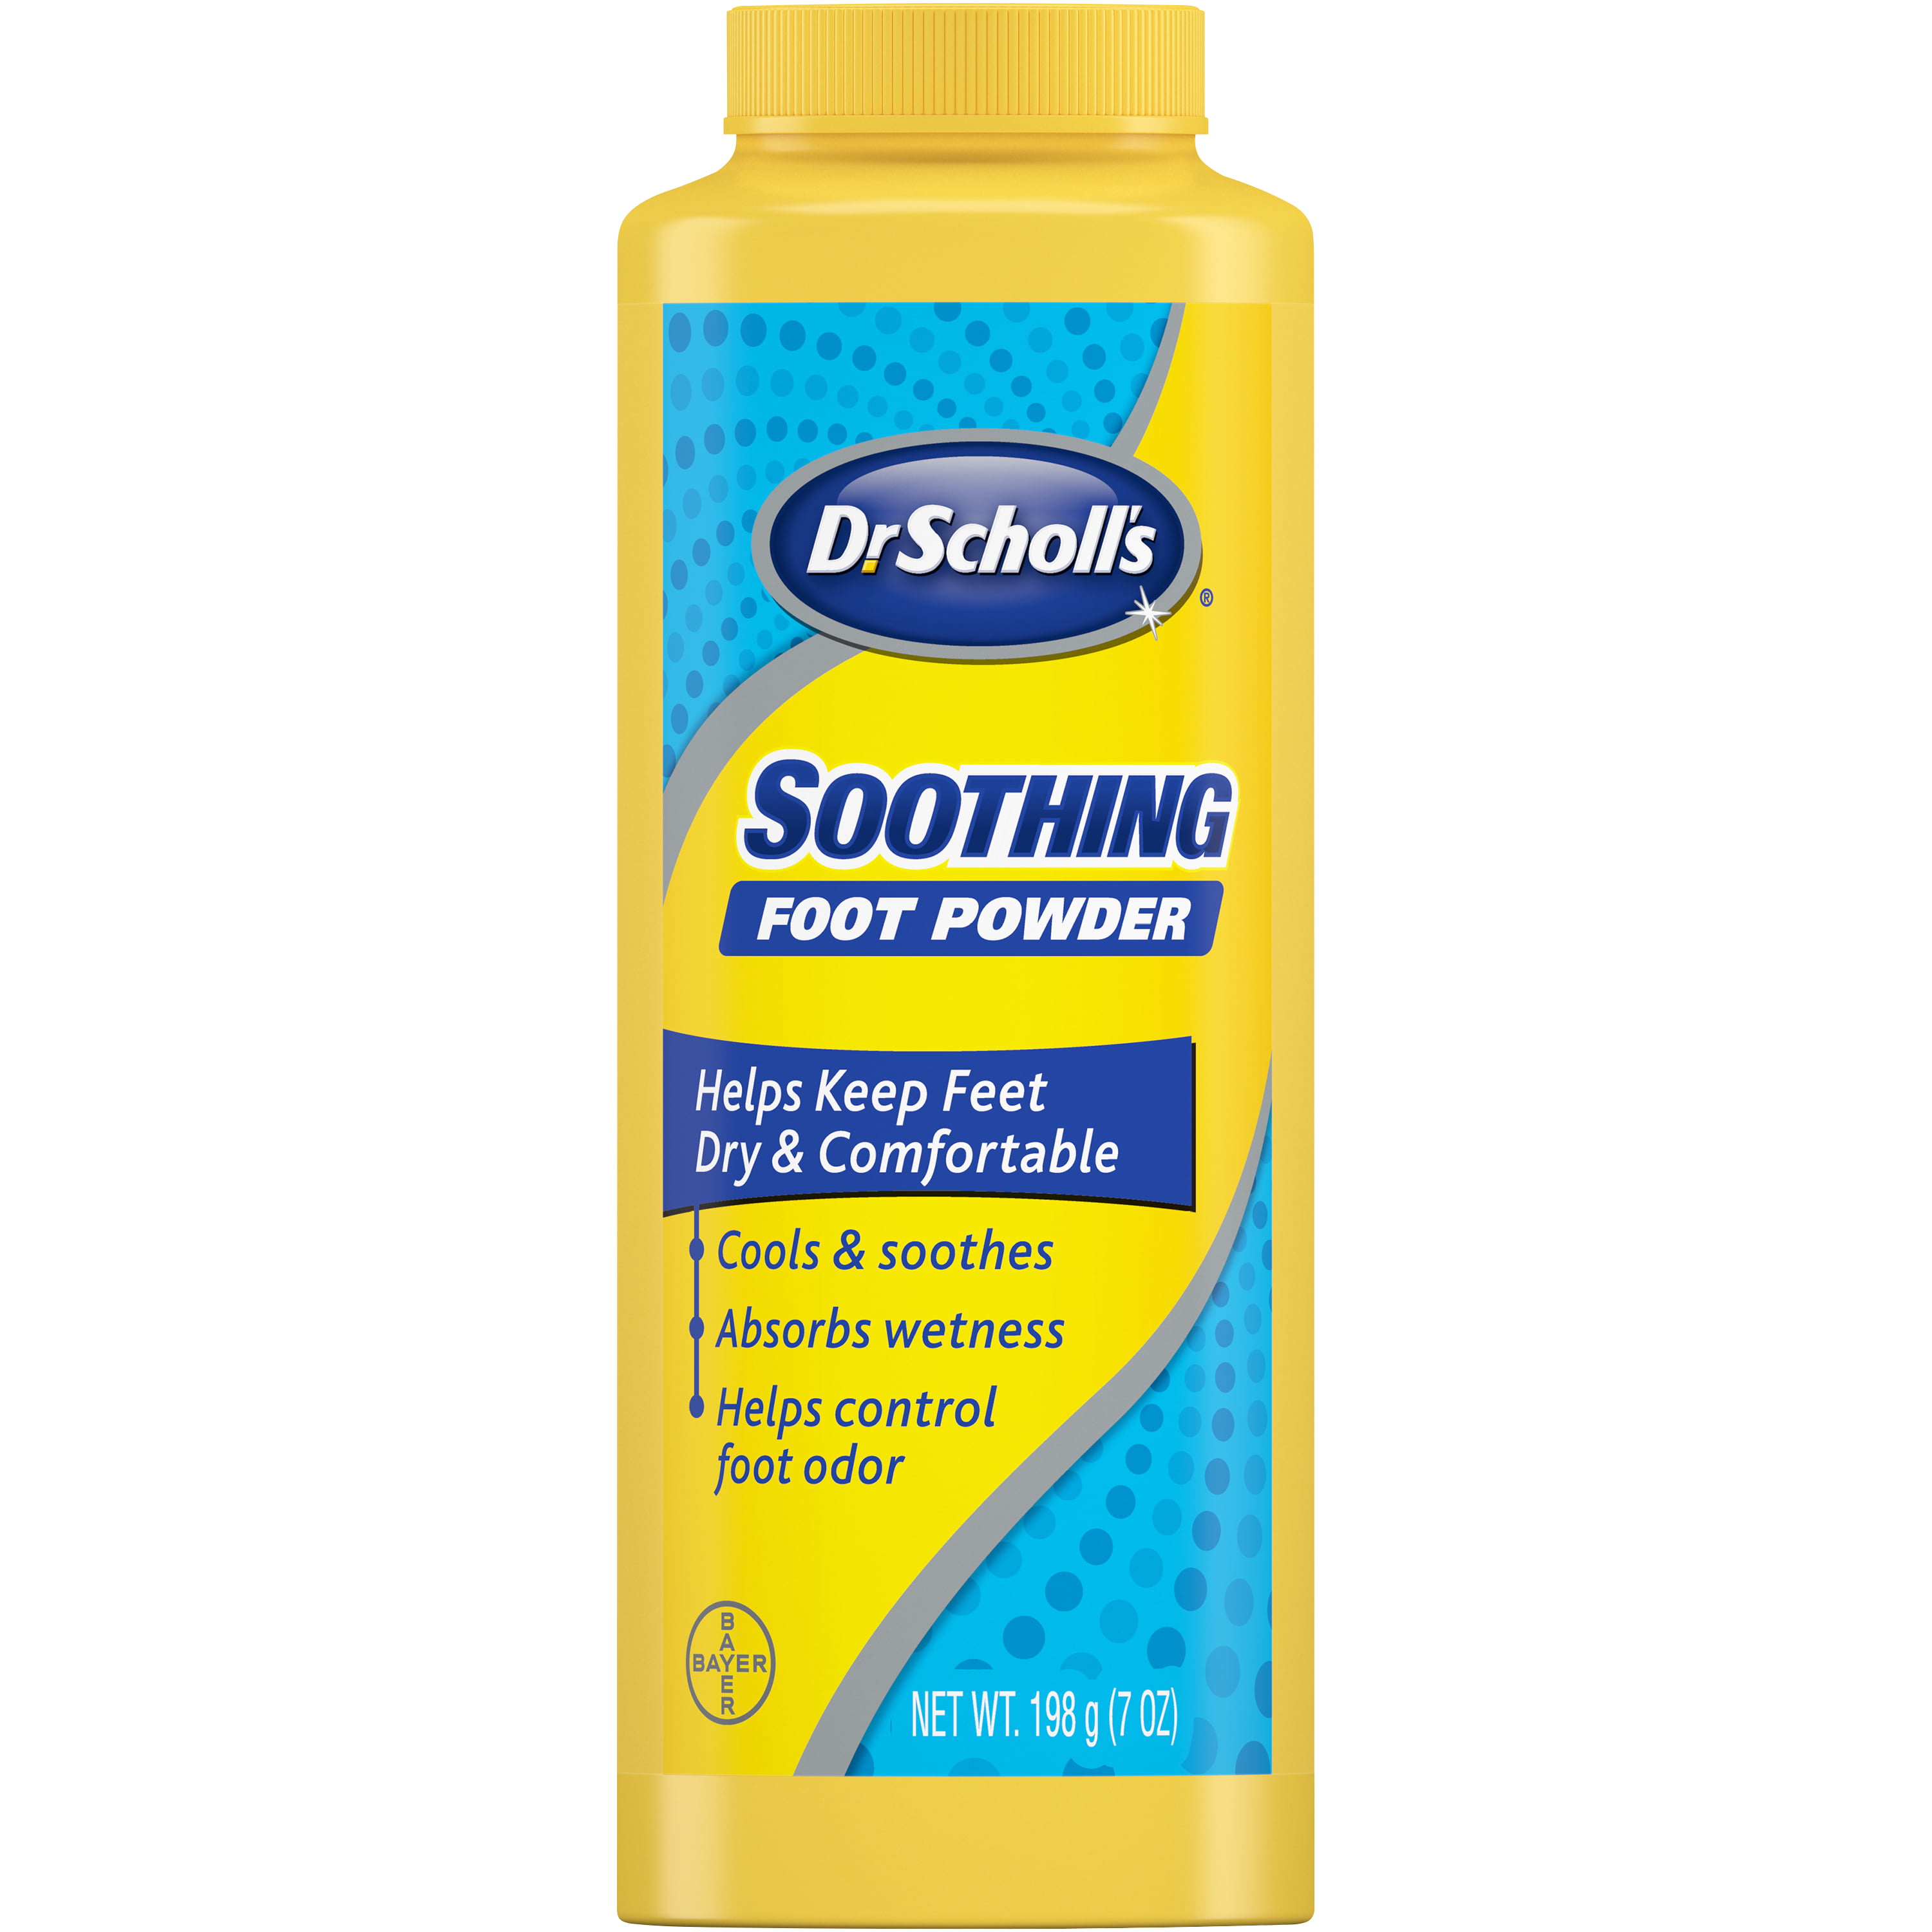 Dr. Scholl's Soothing Foot Powder for 